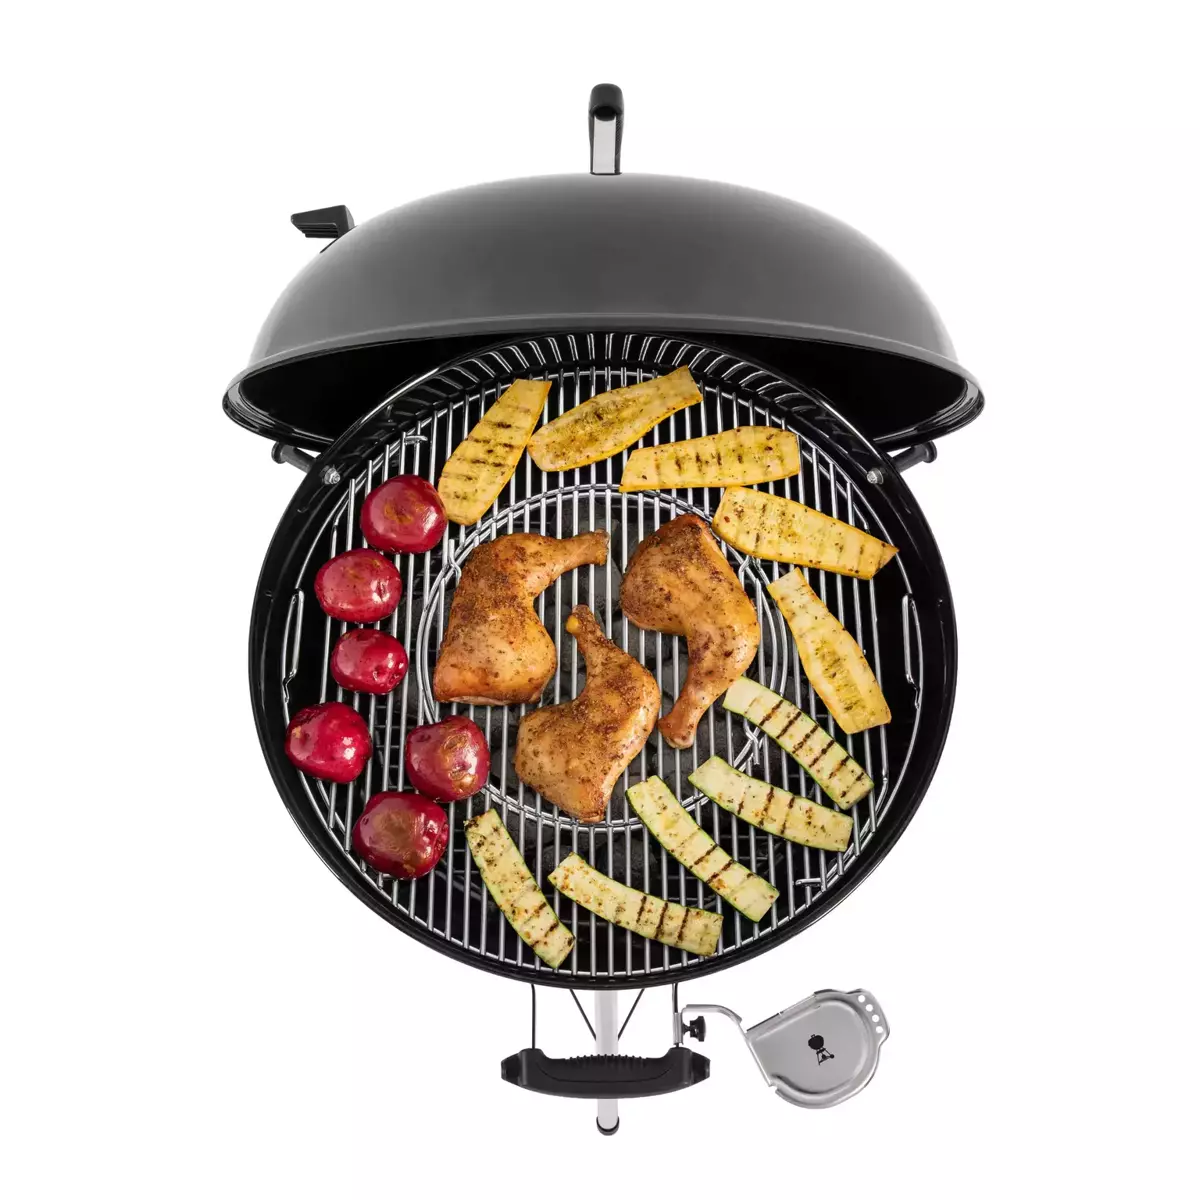 Weber Master Touch GBS E-5750 - Black - image 3